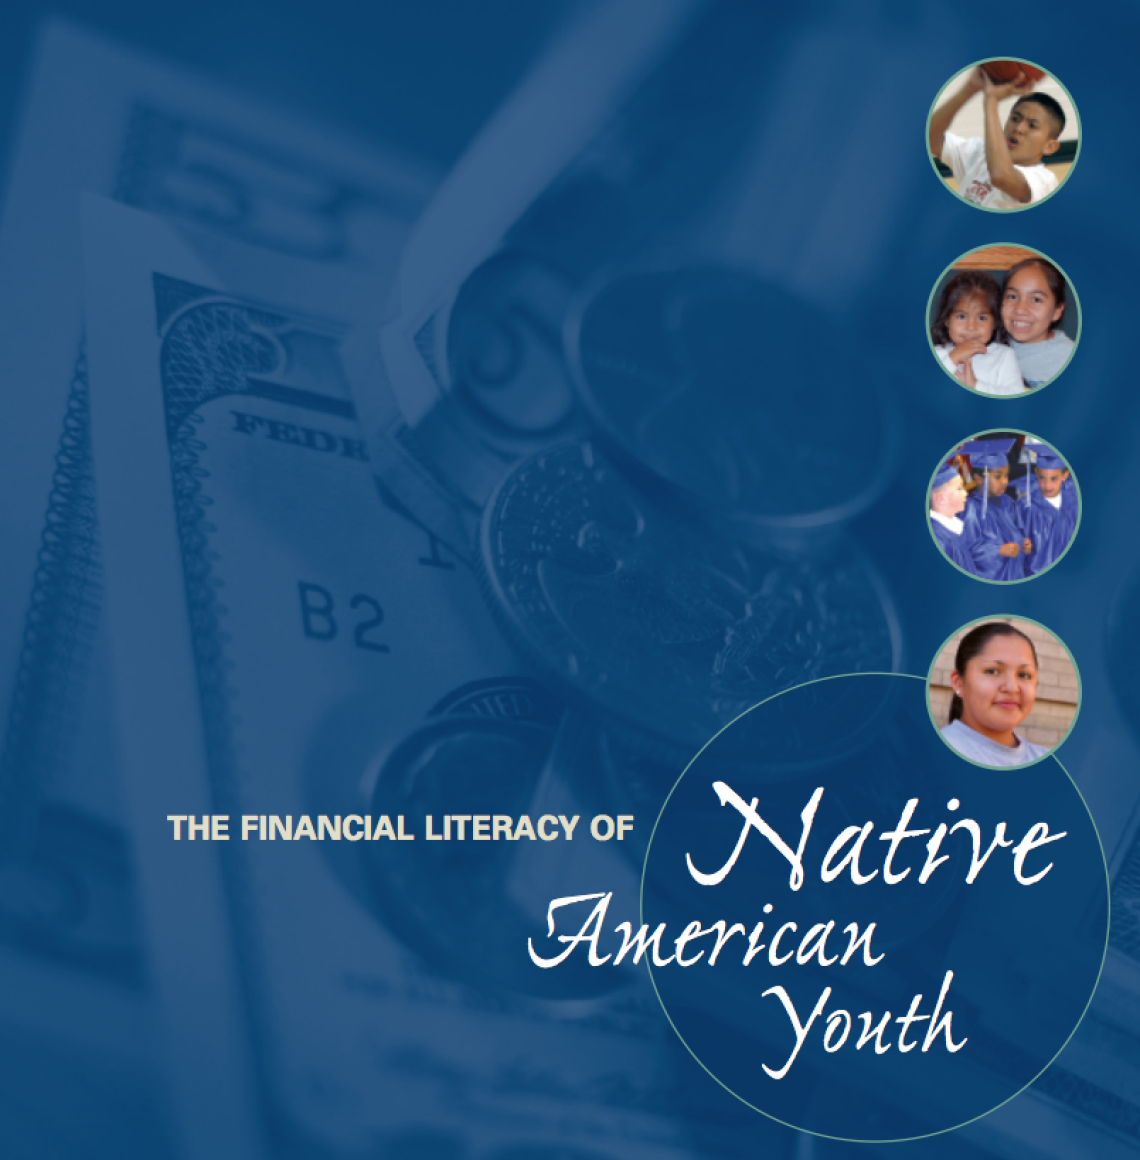 The Financial Literacy of Native American Youth